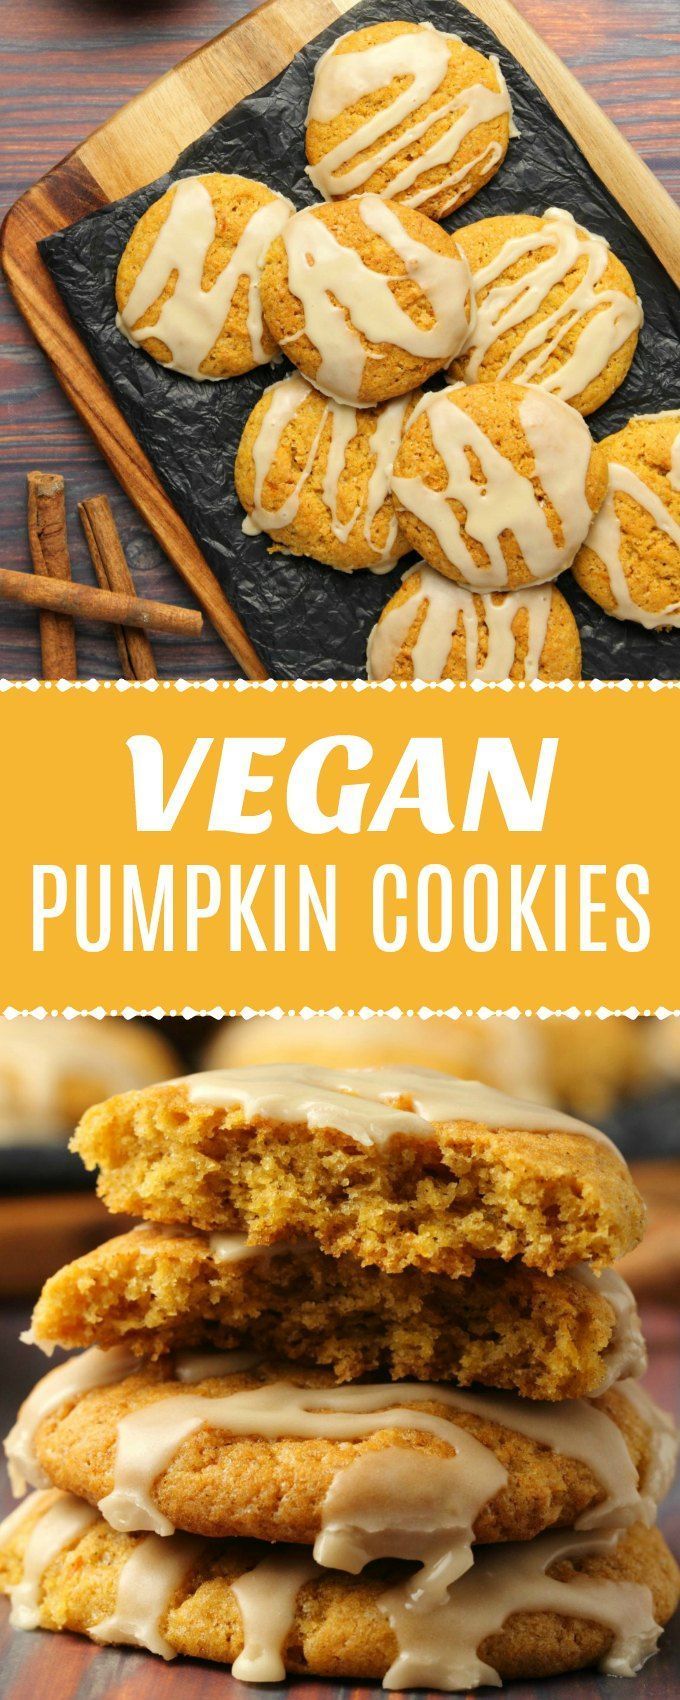 Beautifully soft vegan pumpkin cookies drizzled with a maple glaze. This simple recipe is perfectly spiced and perfect for fall! | lovingitvegan.com -   19 vegetarian recipes vegan
 ideas